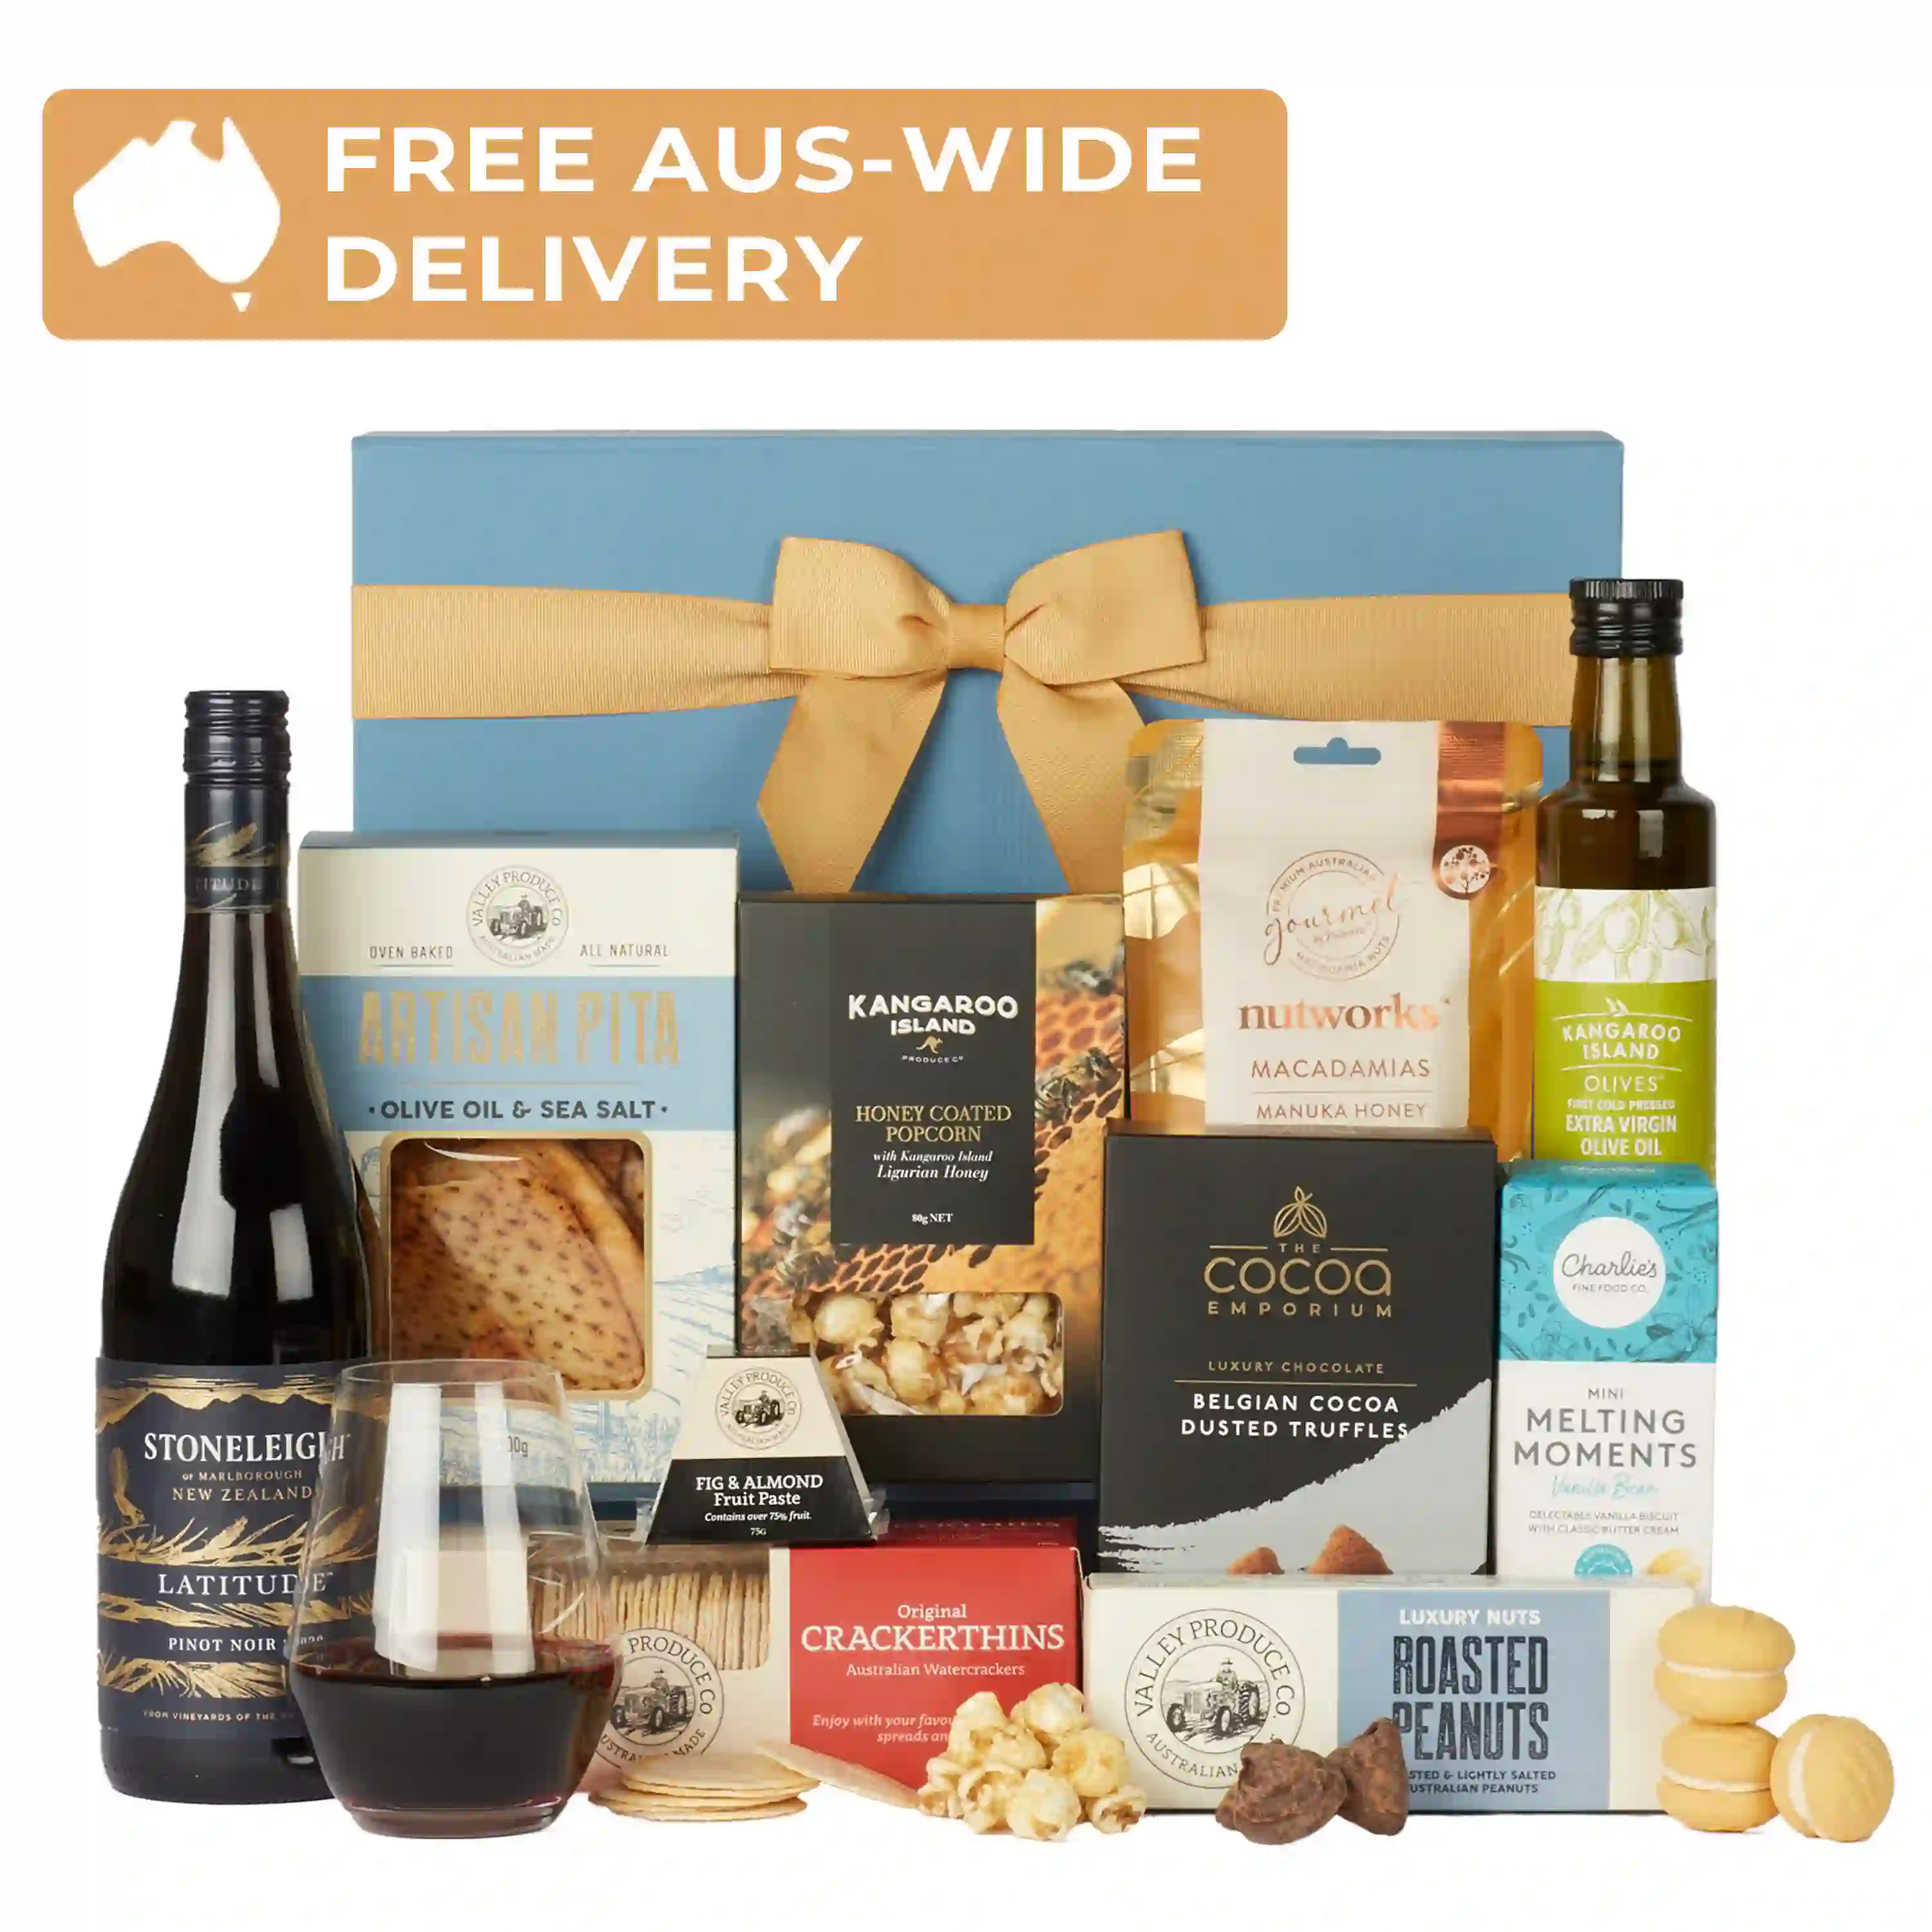 Gifts to a Door - Brisbane's Favourite Gift Baskets, Gift Hampers,  Christmas Hampers, Hand Delivered in Brisbane, Gourmet Hampers, New Baby  Gifts, Australia Wide Delivery